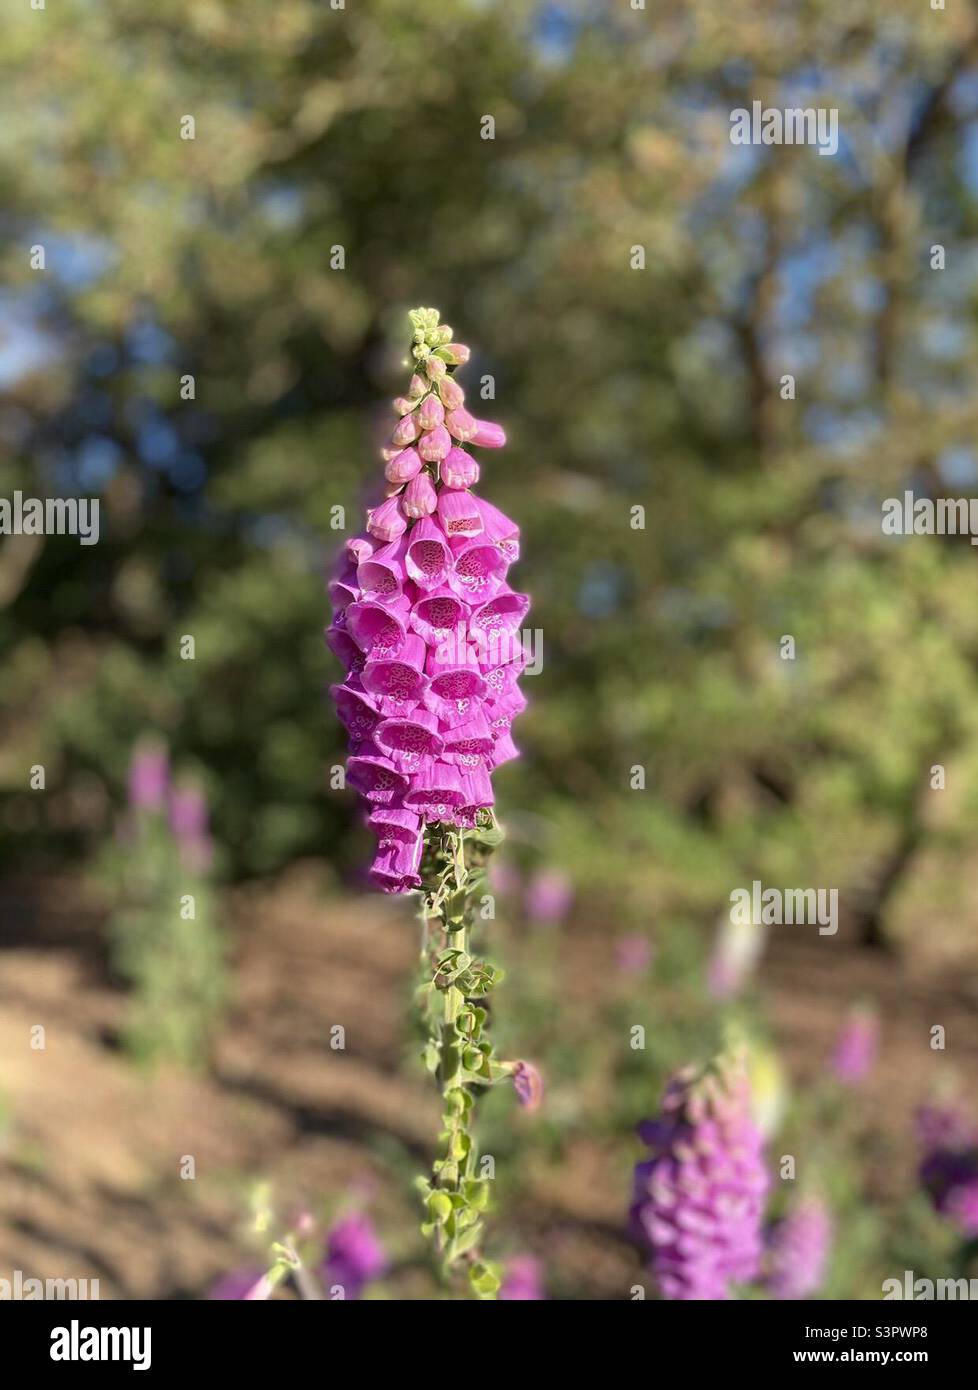 Foxgloves plant (Digitalis) in hot pink colour, displaying its clusters of tubular bell-shaped blooms Stock Photo